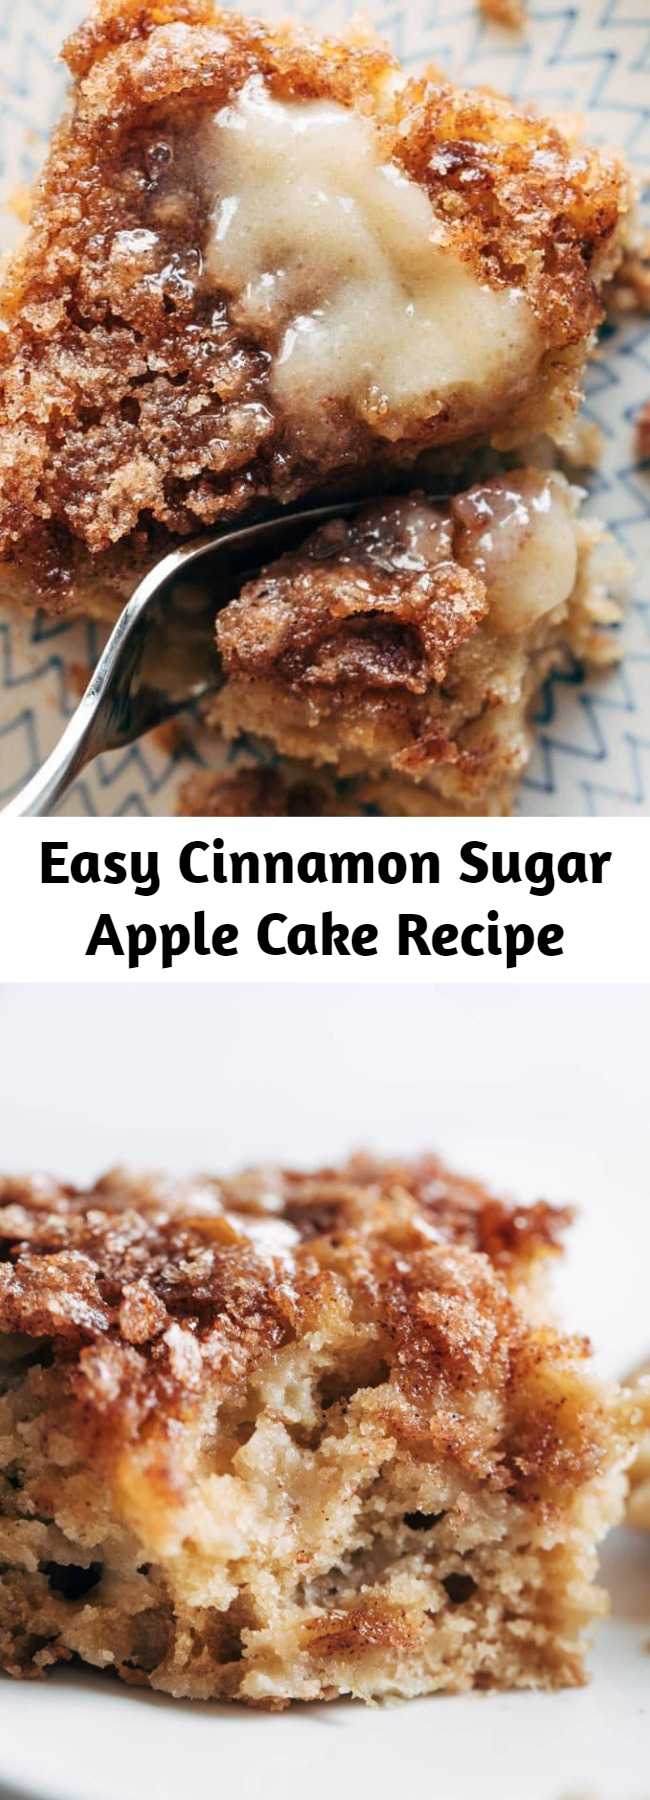 Easy Cinnamon Sugar Apple Cake Recipe - This simple cinnamon sugar apple cake is light and fluffy, loaded with fresh apples, and topped with a crunchy cinnamon sugar layer! It’s low maintenance, highly snackable, and 100% as warming, fragrant, and cozy a basic apple cake should be.  #cake #apple #dessert #baking #recipe